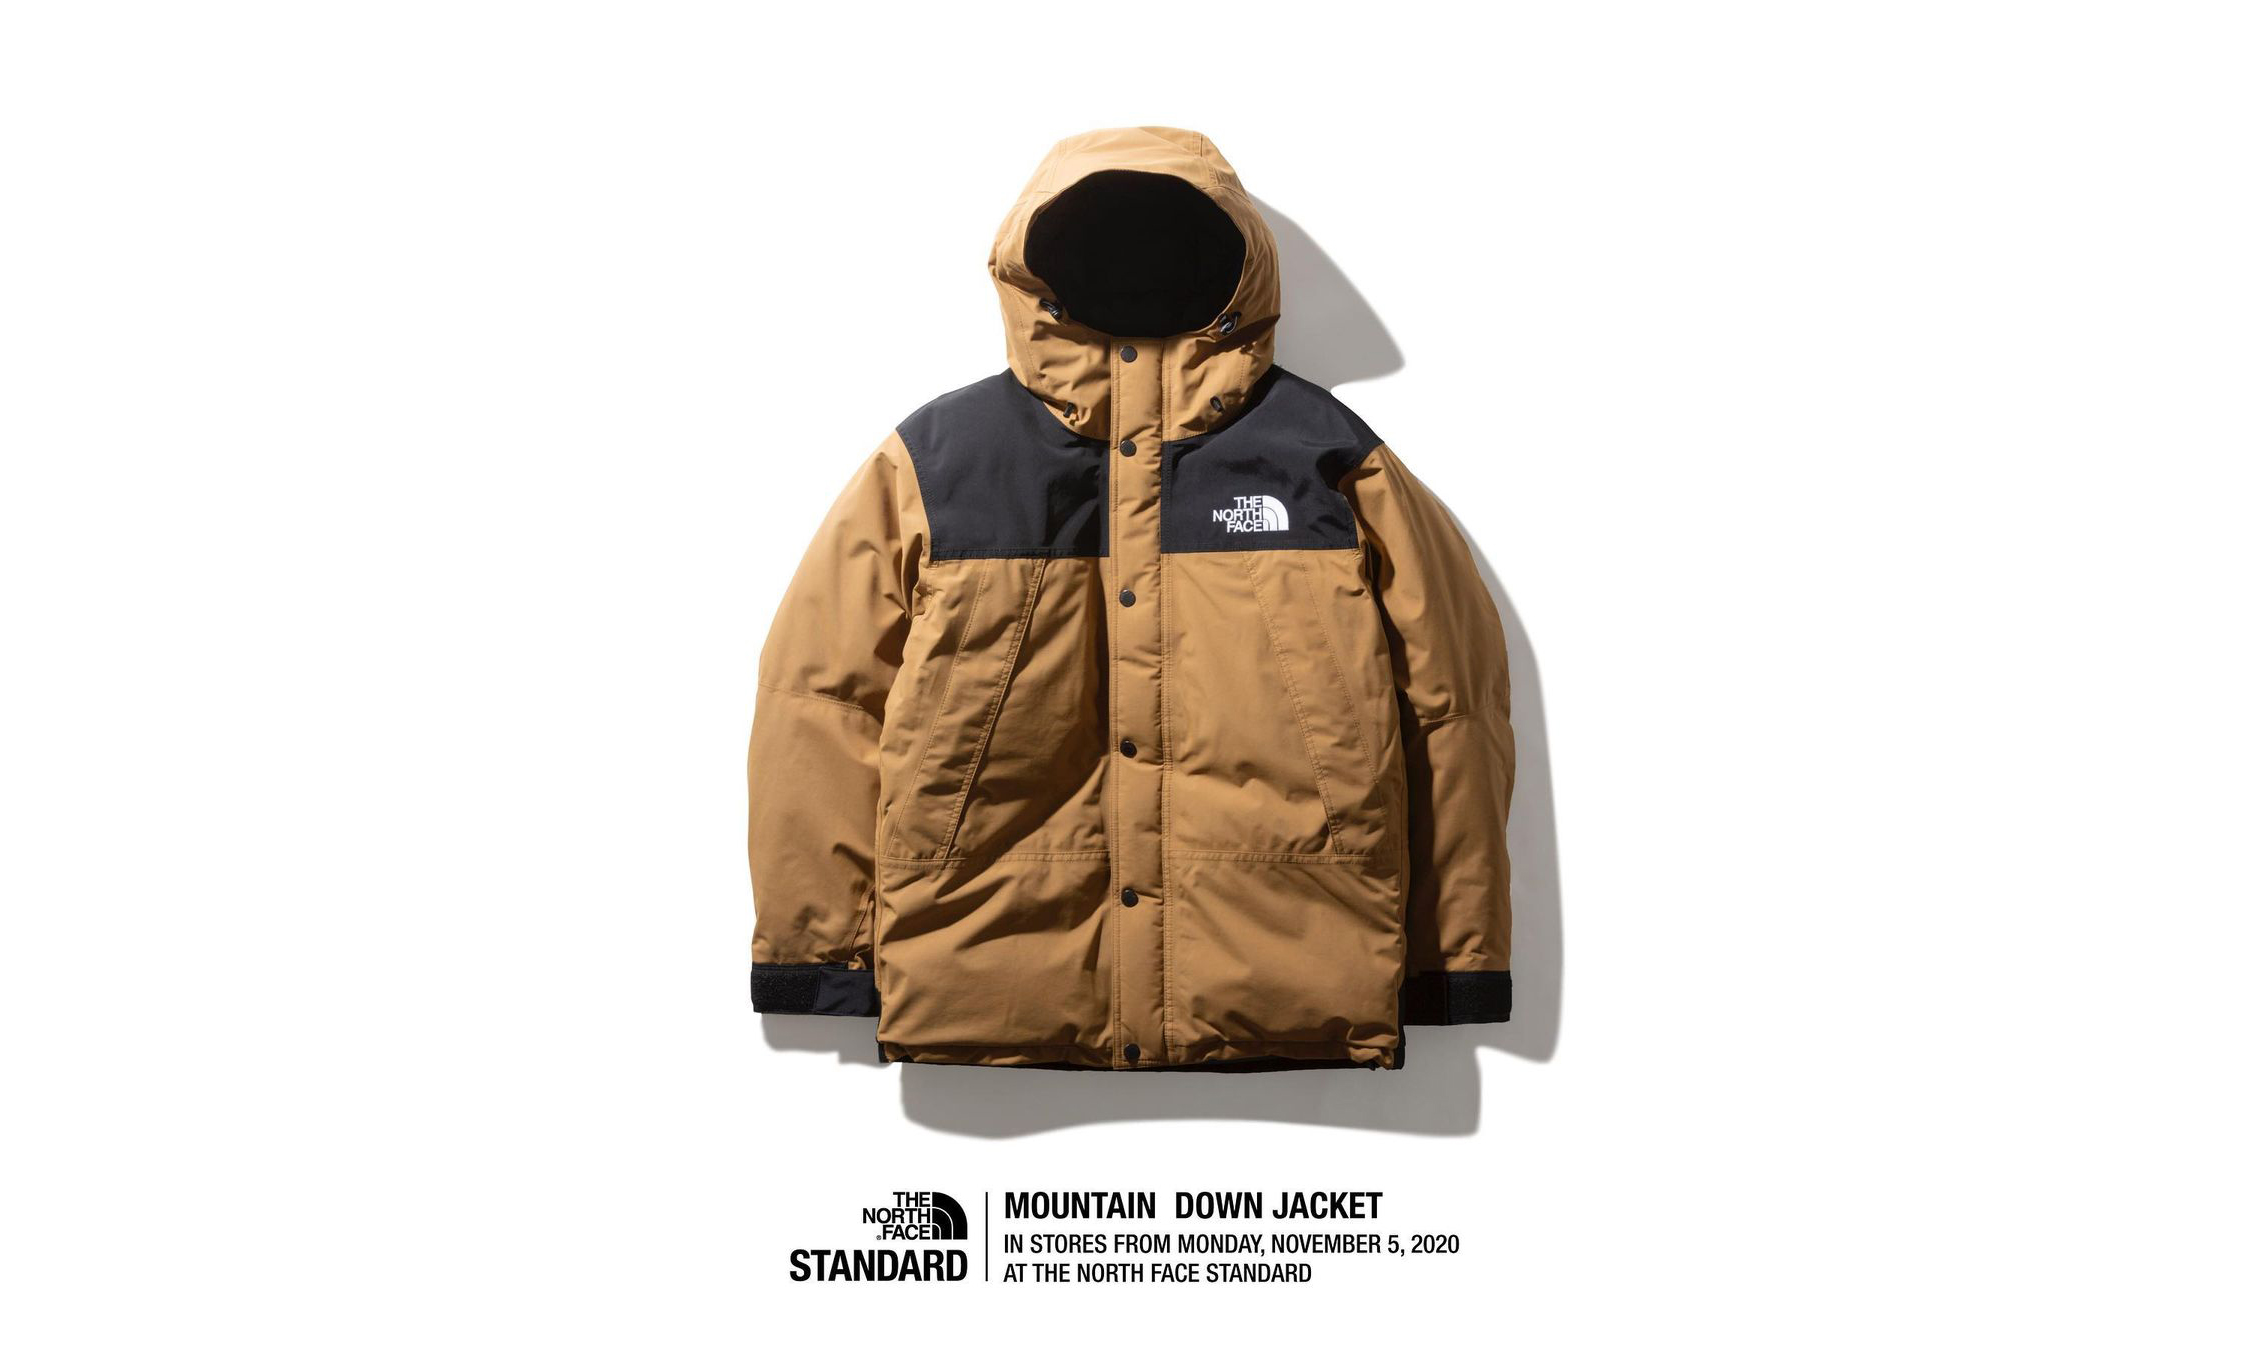 THE NORTH FACE Mountain Down Jacket 再次开售 – NOWRE现客